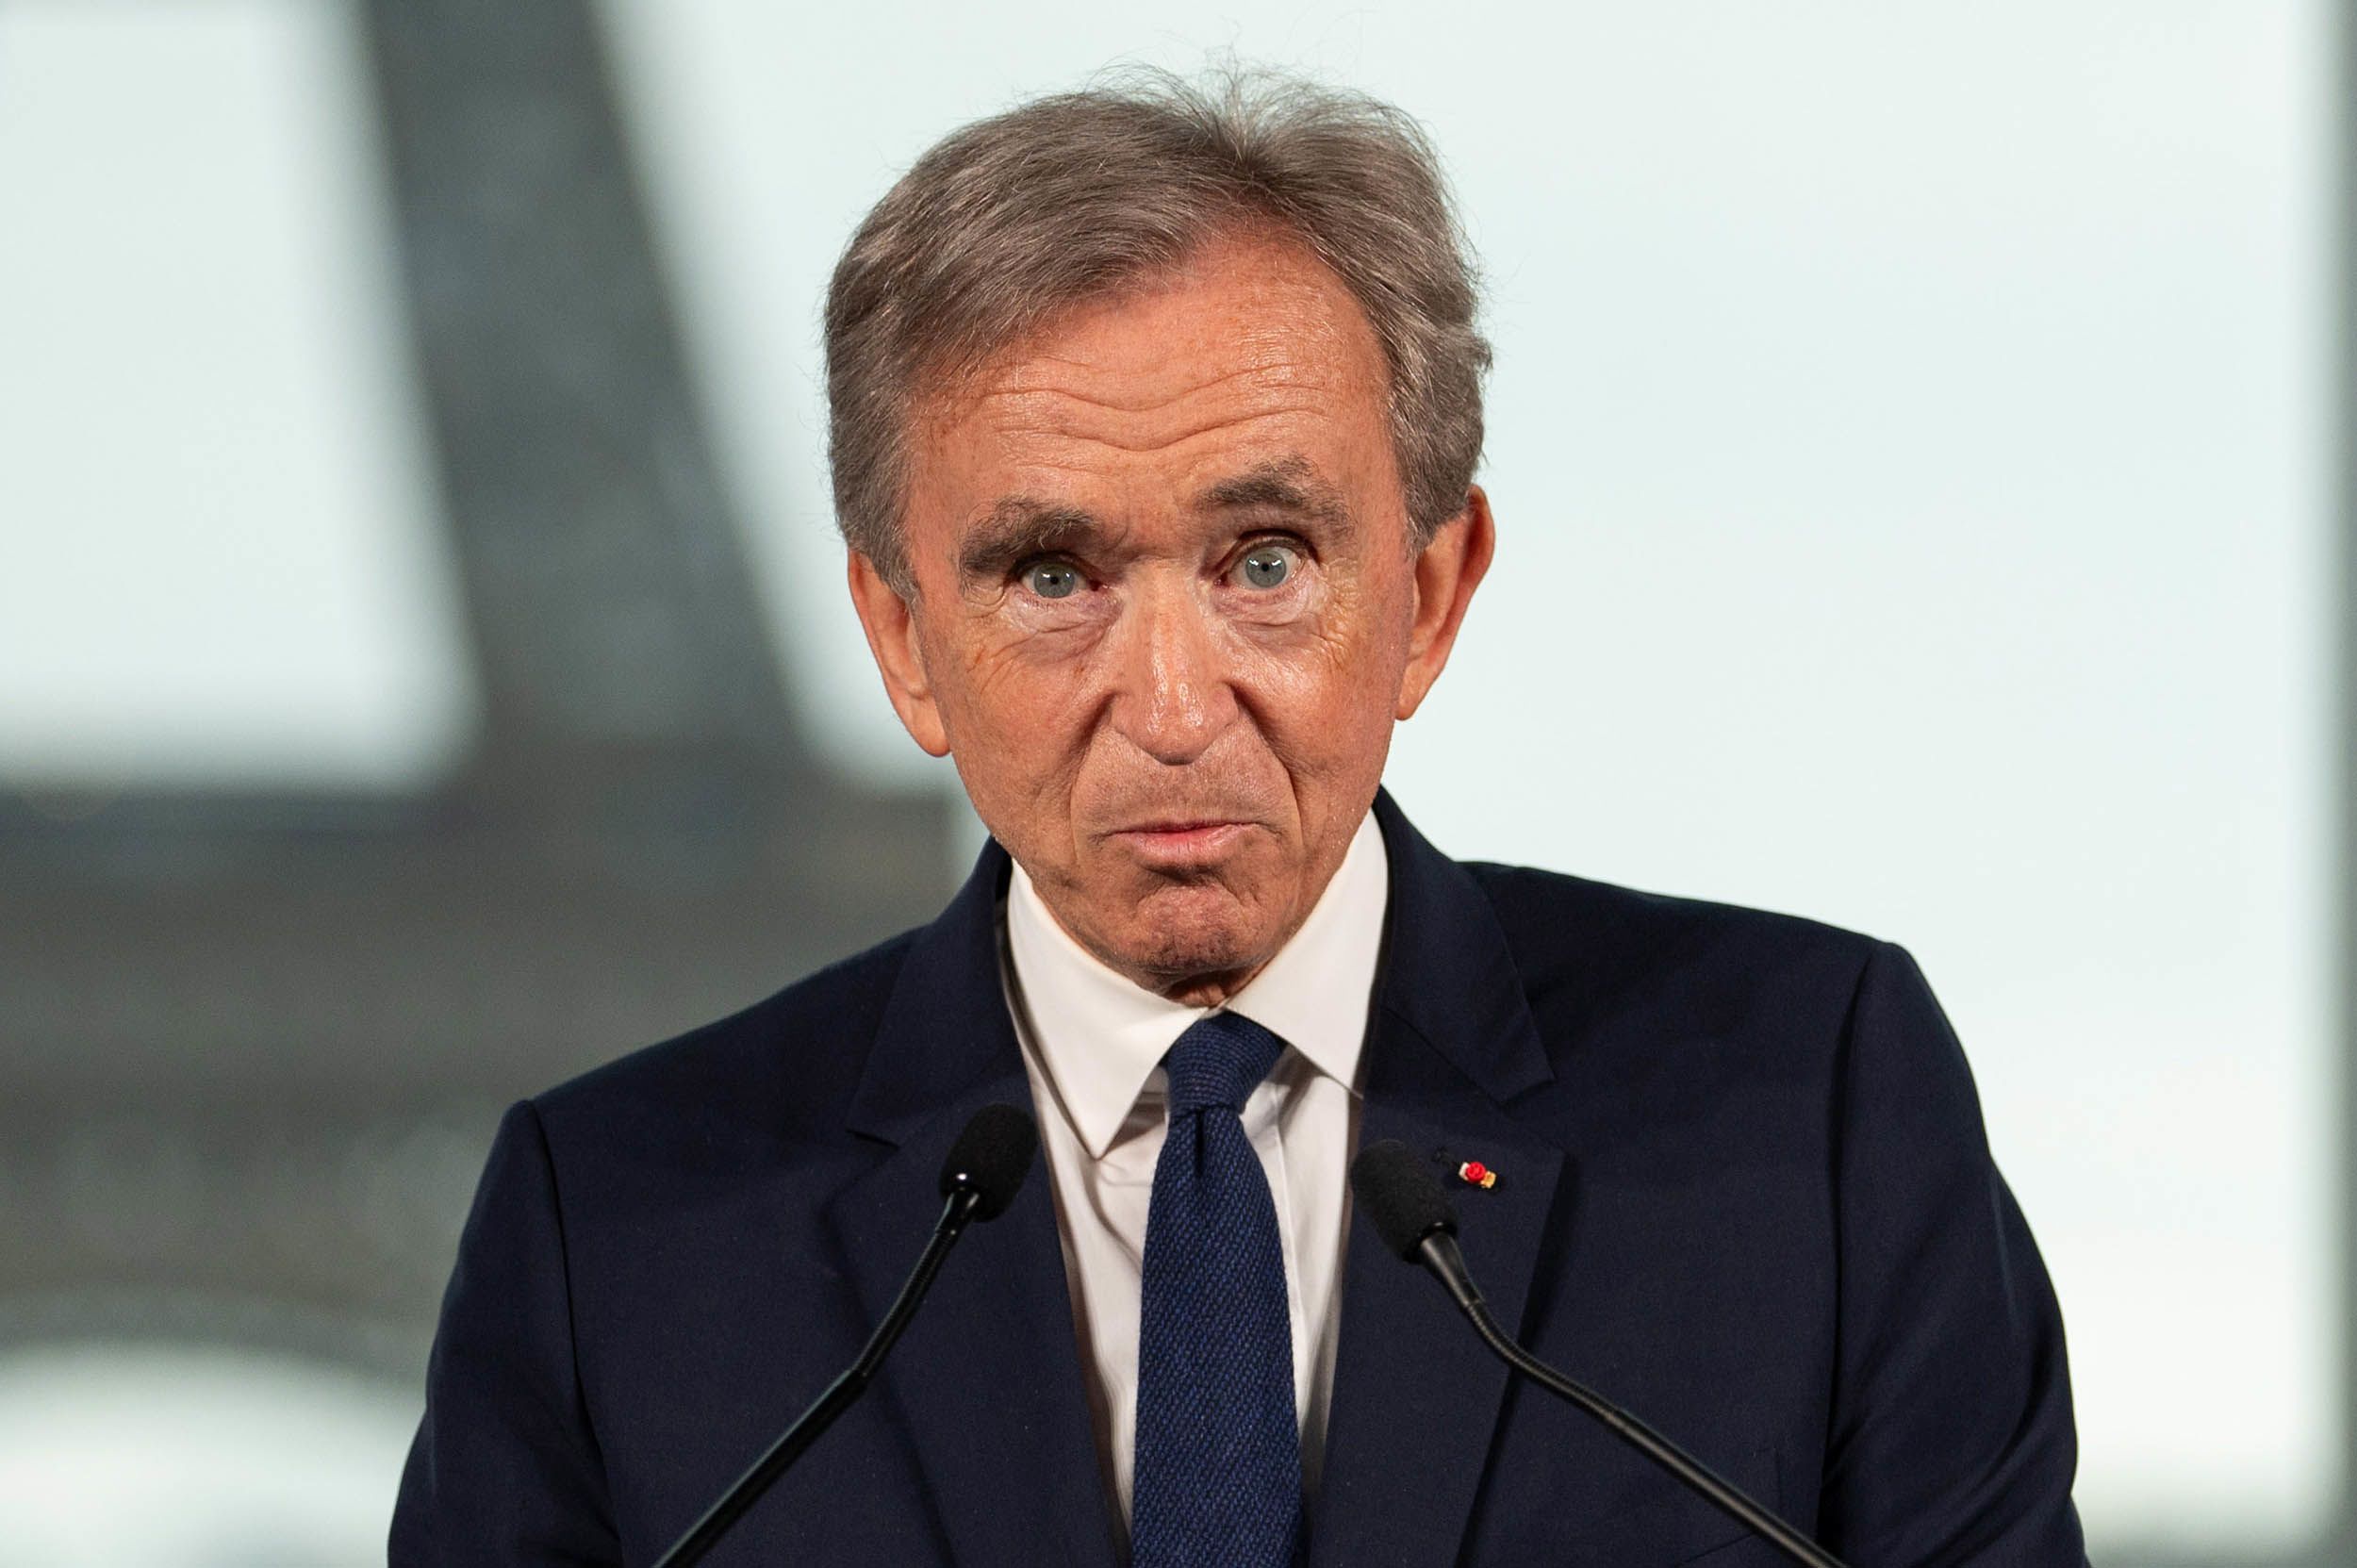 Arnault money-laundering claims “absurd and unfounded”